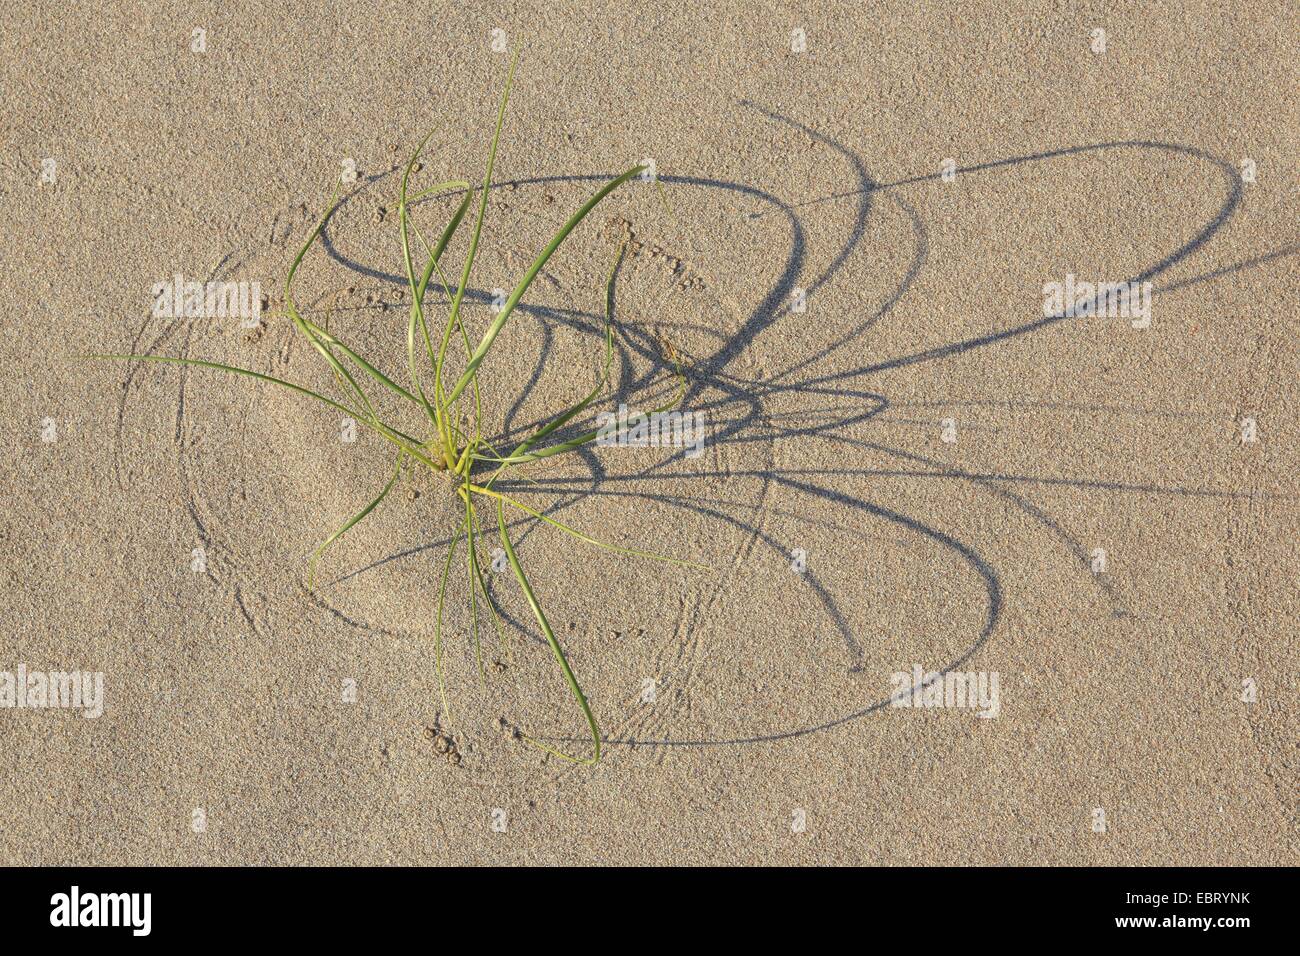 shadows of dune grass in the sand, United Kingdom, Scotland, Sutherland Stock Photo